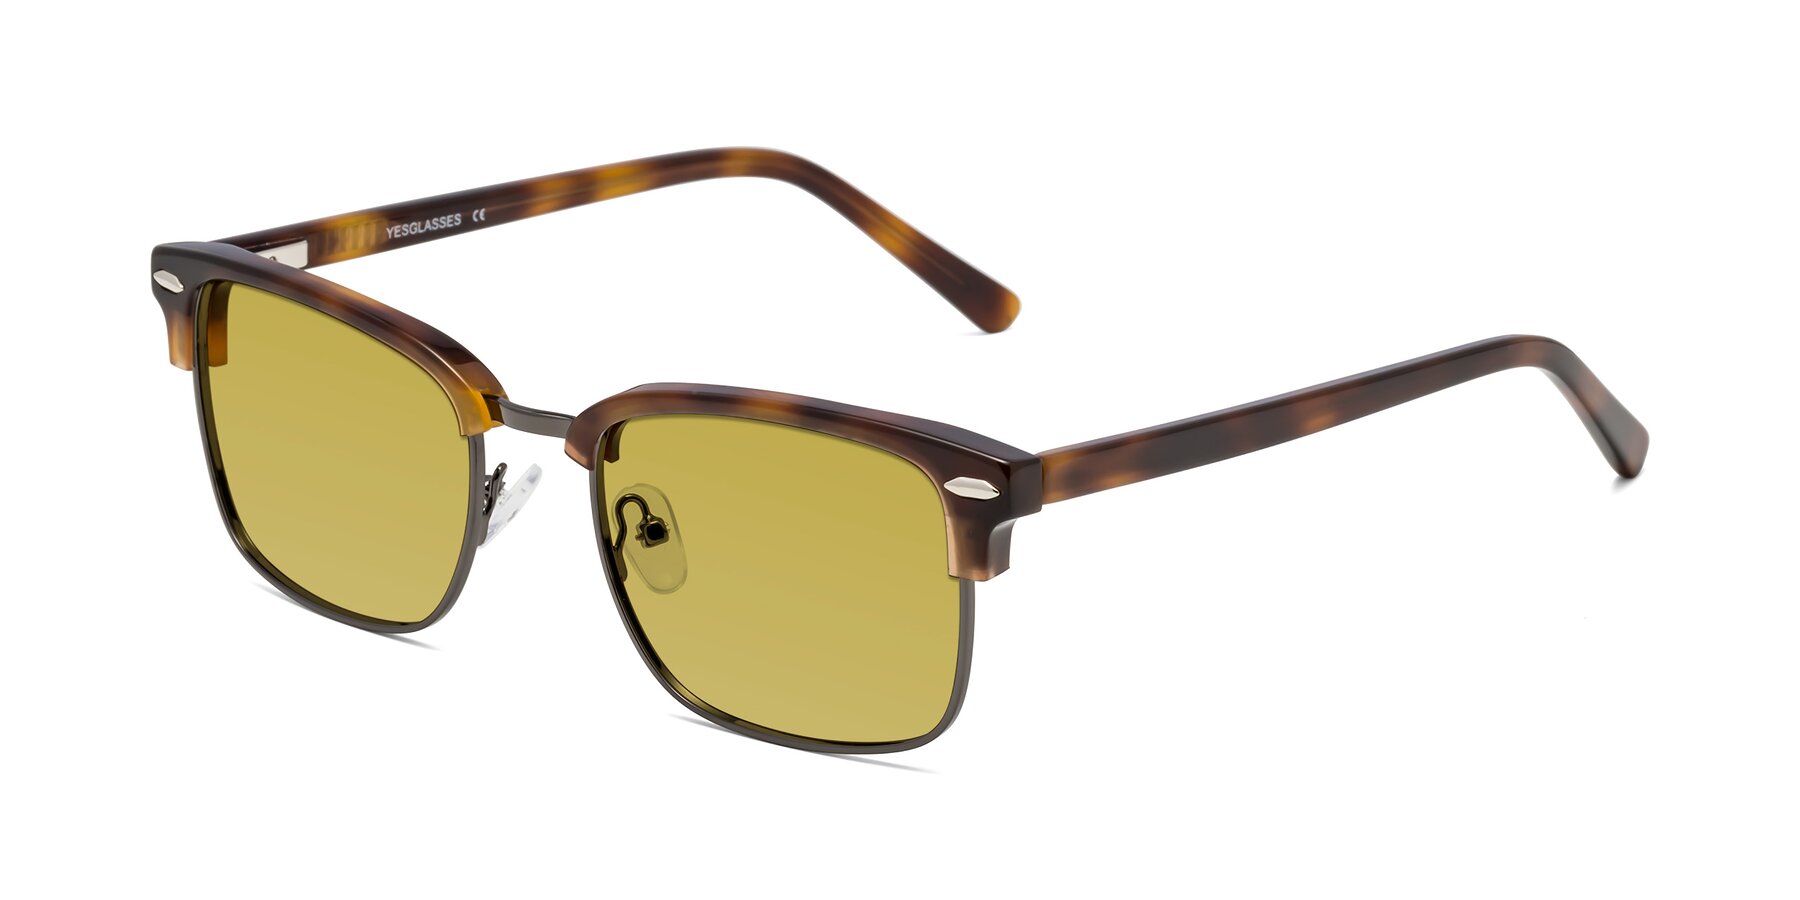 Angle of 17464 in Tortoise/ Gunmetal with Champagne Tinted Lenses